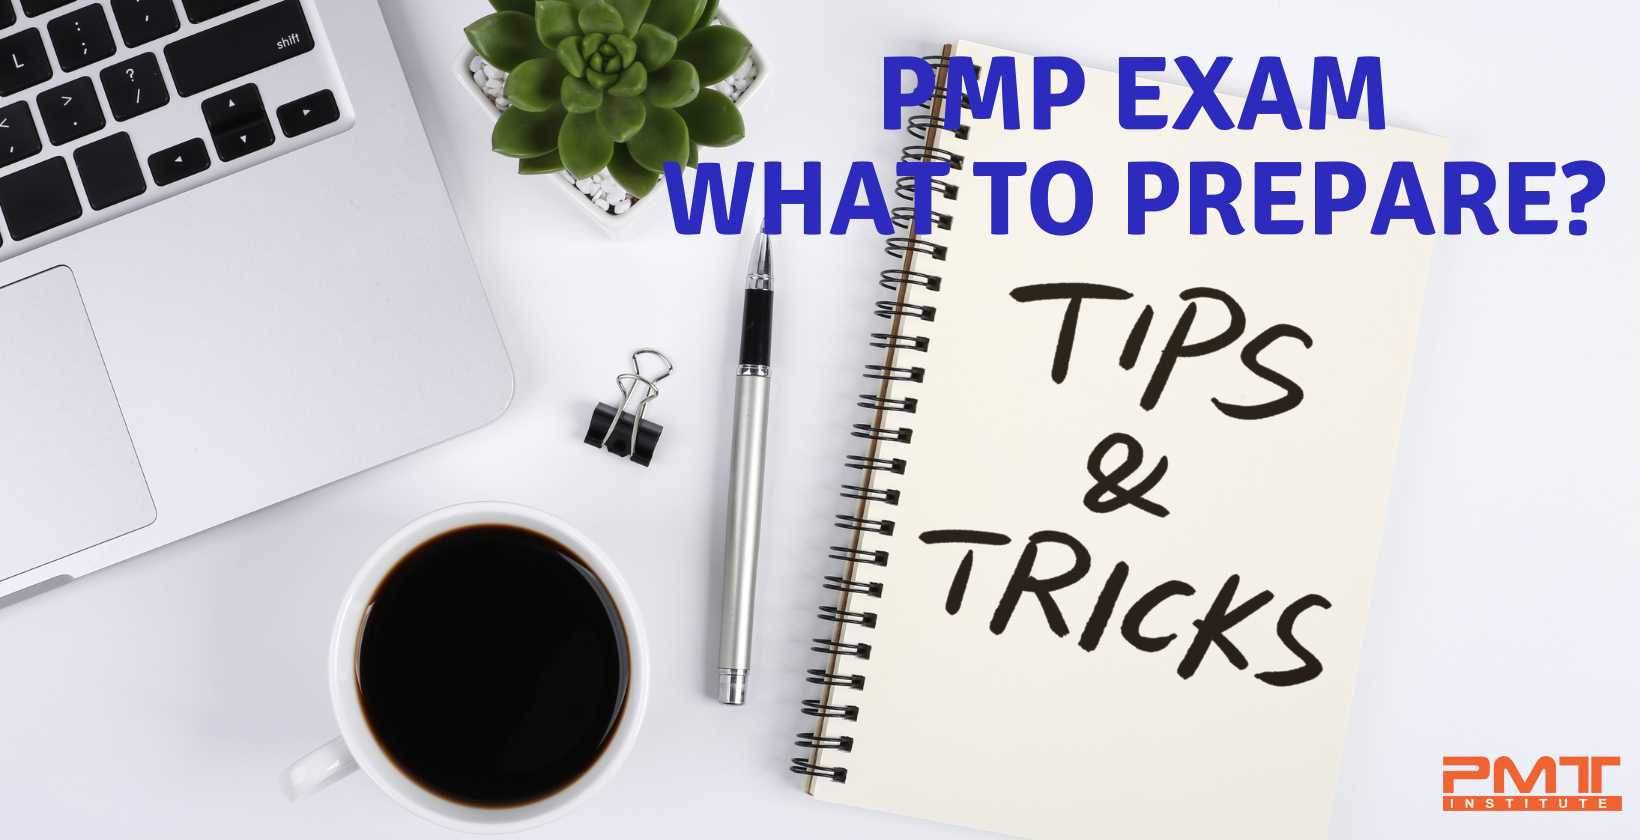 Tips for PMP Exam: What To Prepare?